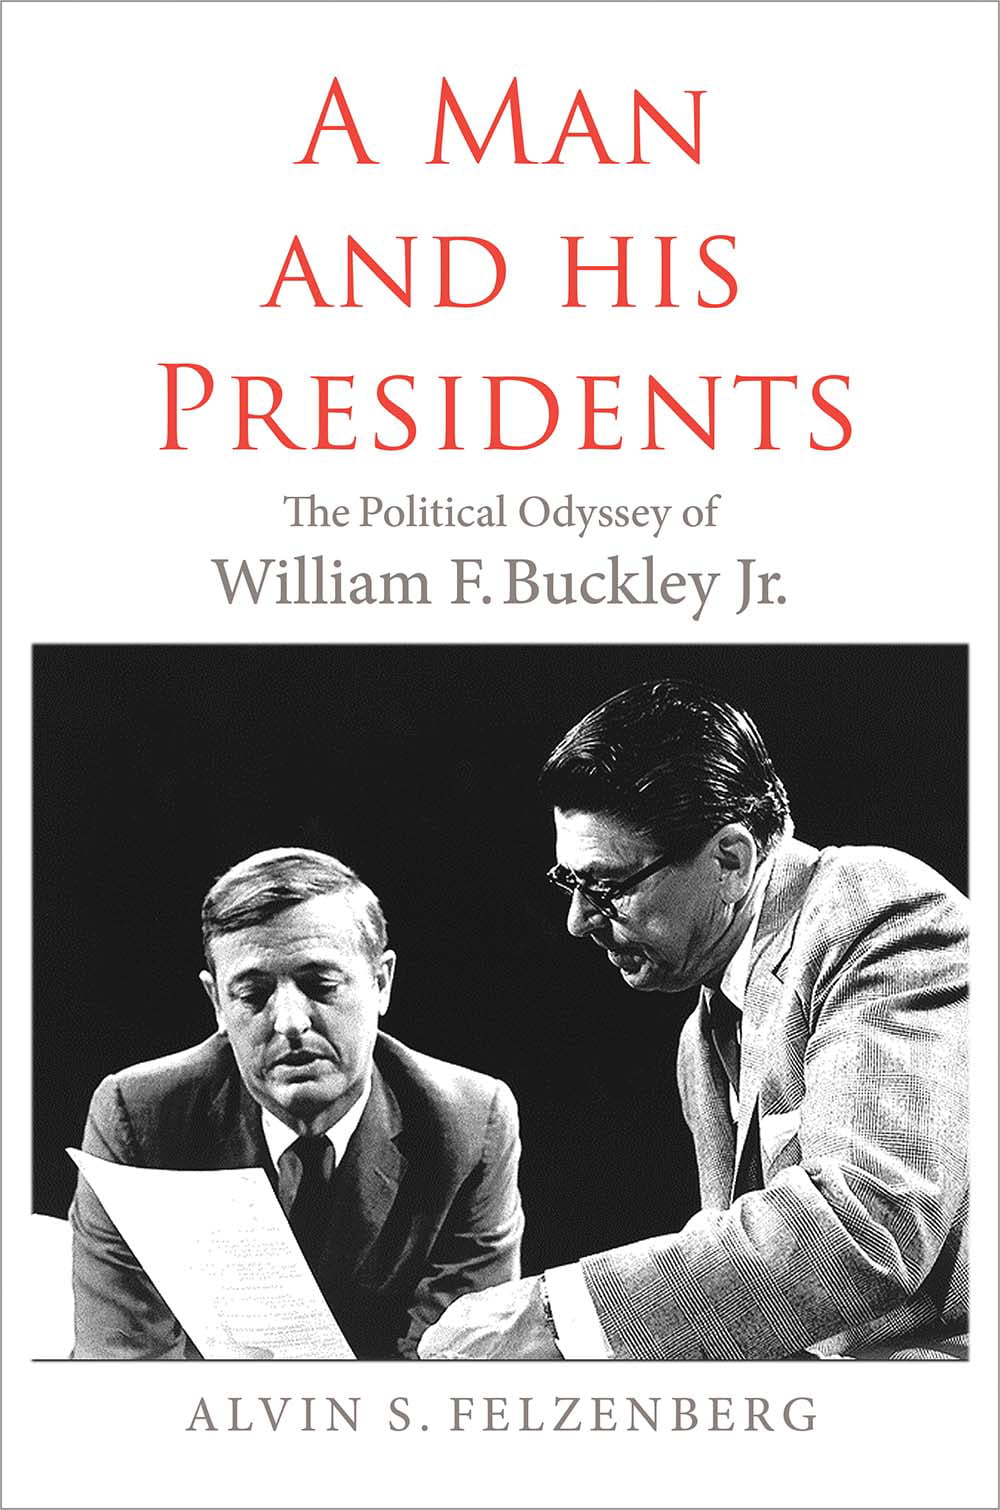 A Man and His Presidents The Political Odyssey of William F Buckley Jr.